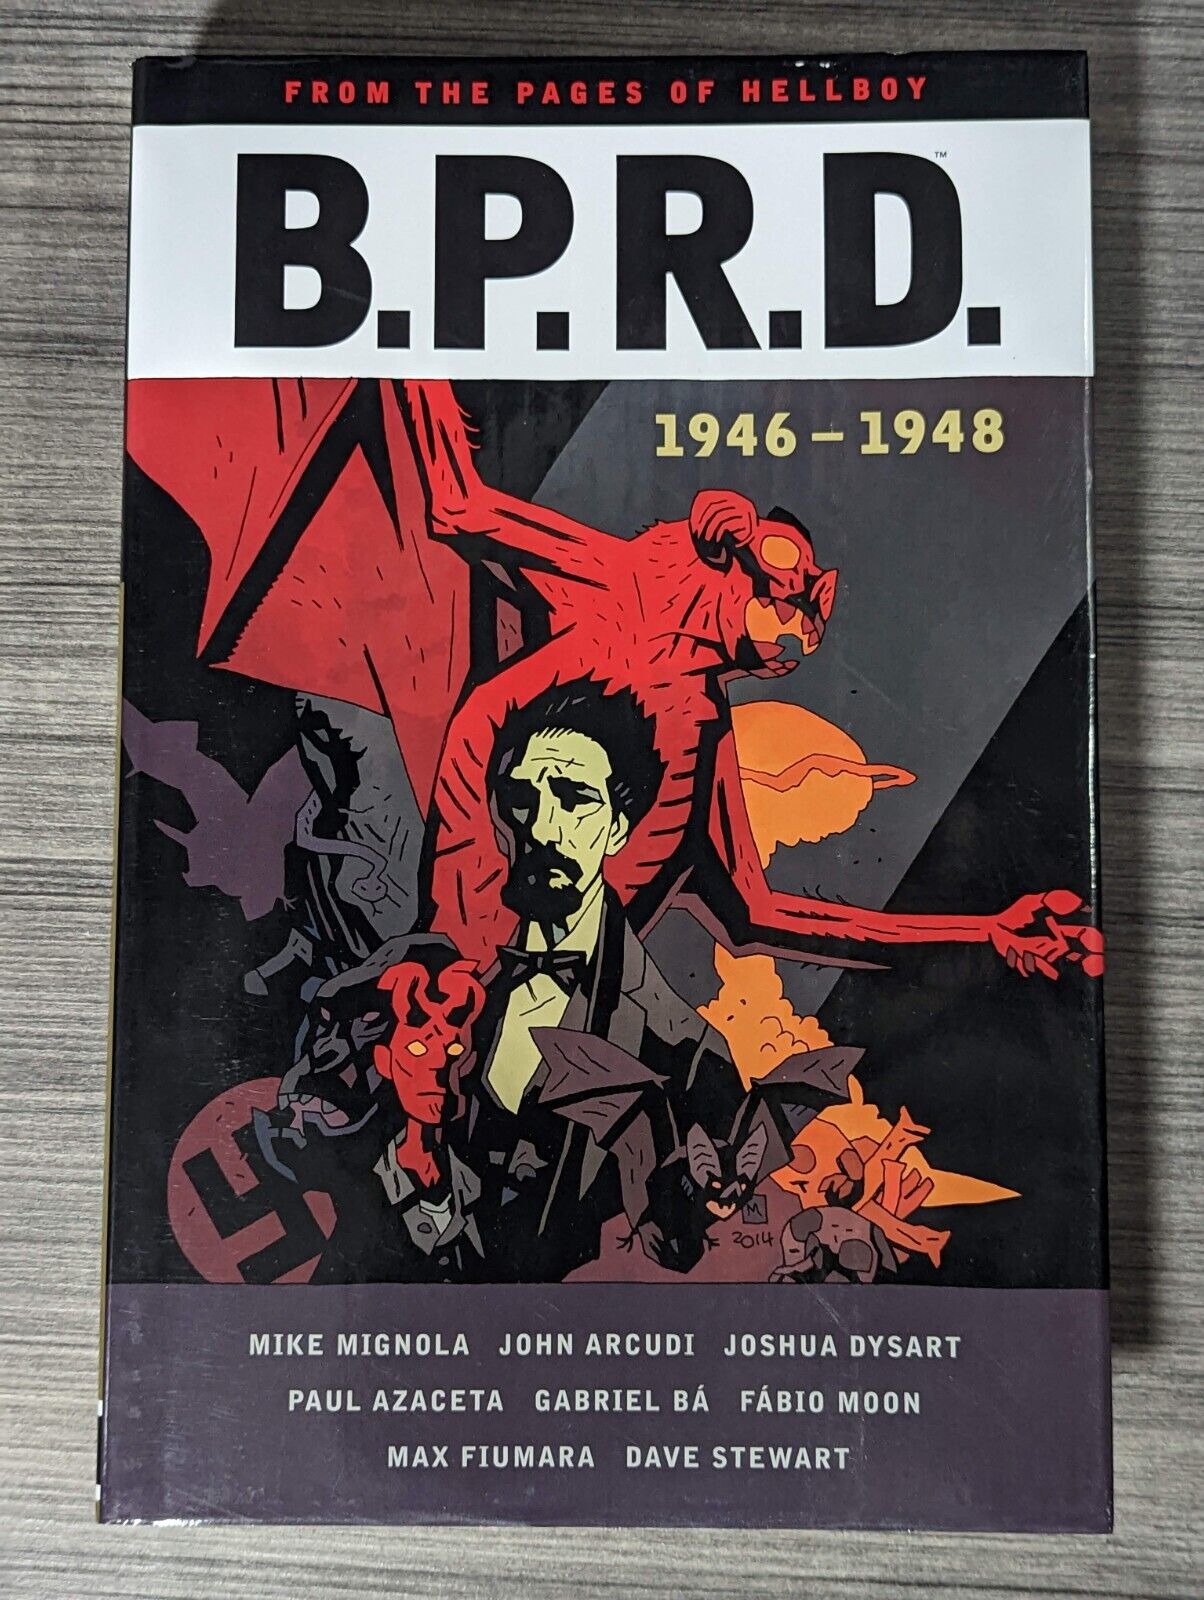 B. P. R. D: 1946-1948 by Mike Mignola and Joshua Dysart Hardcover Omnibus